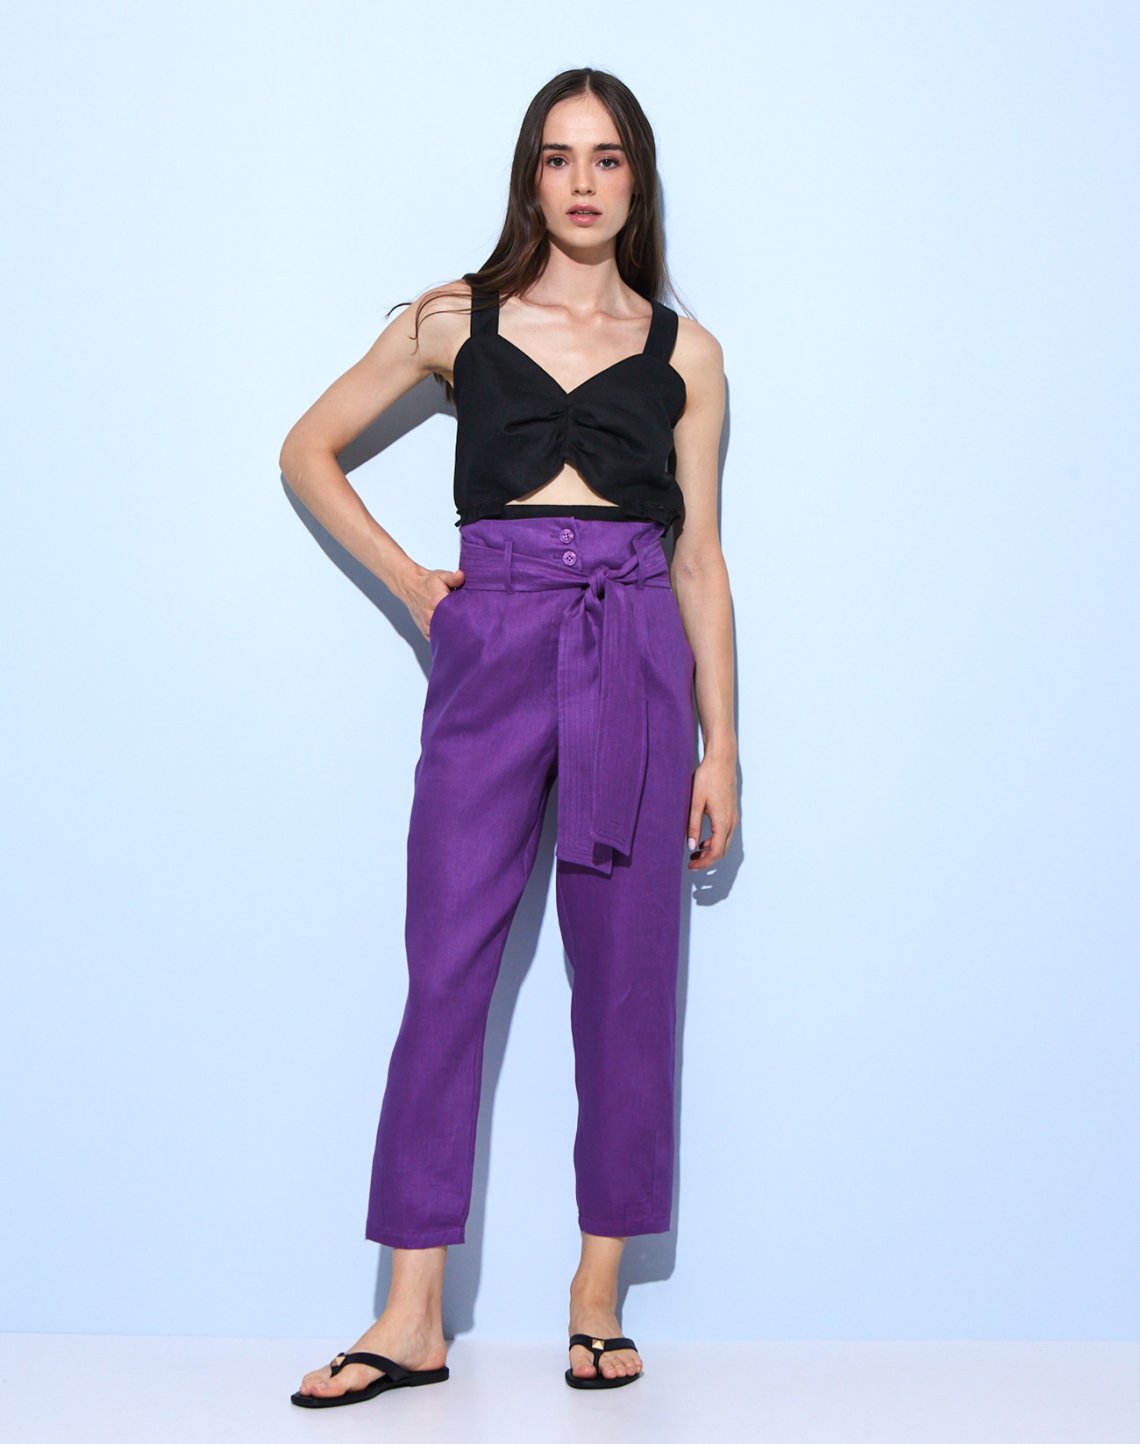 Linen trousers with belt